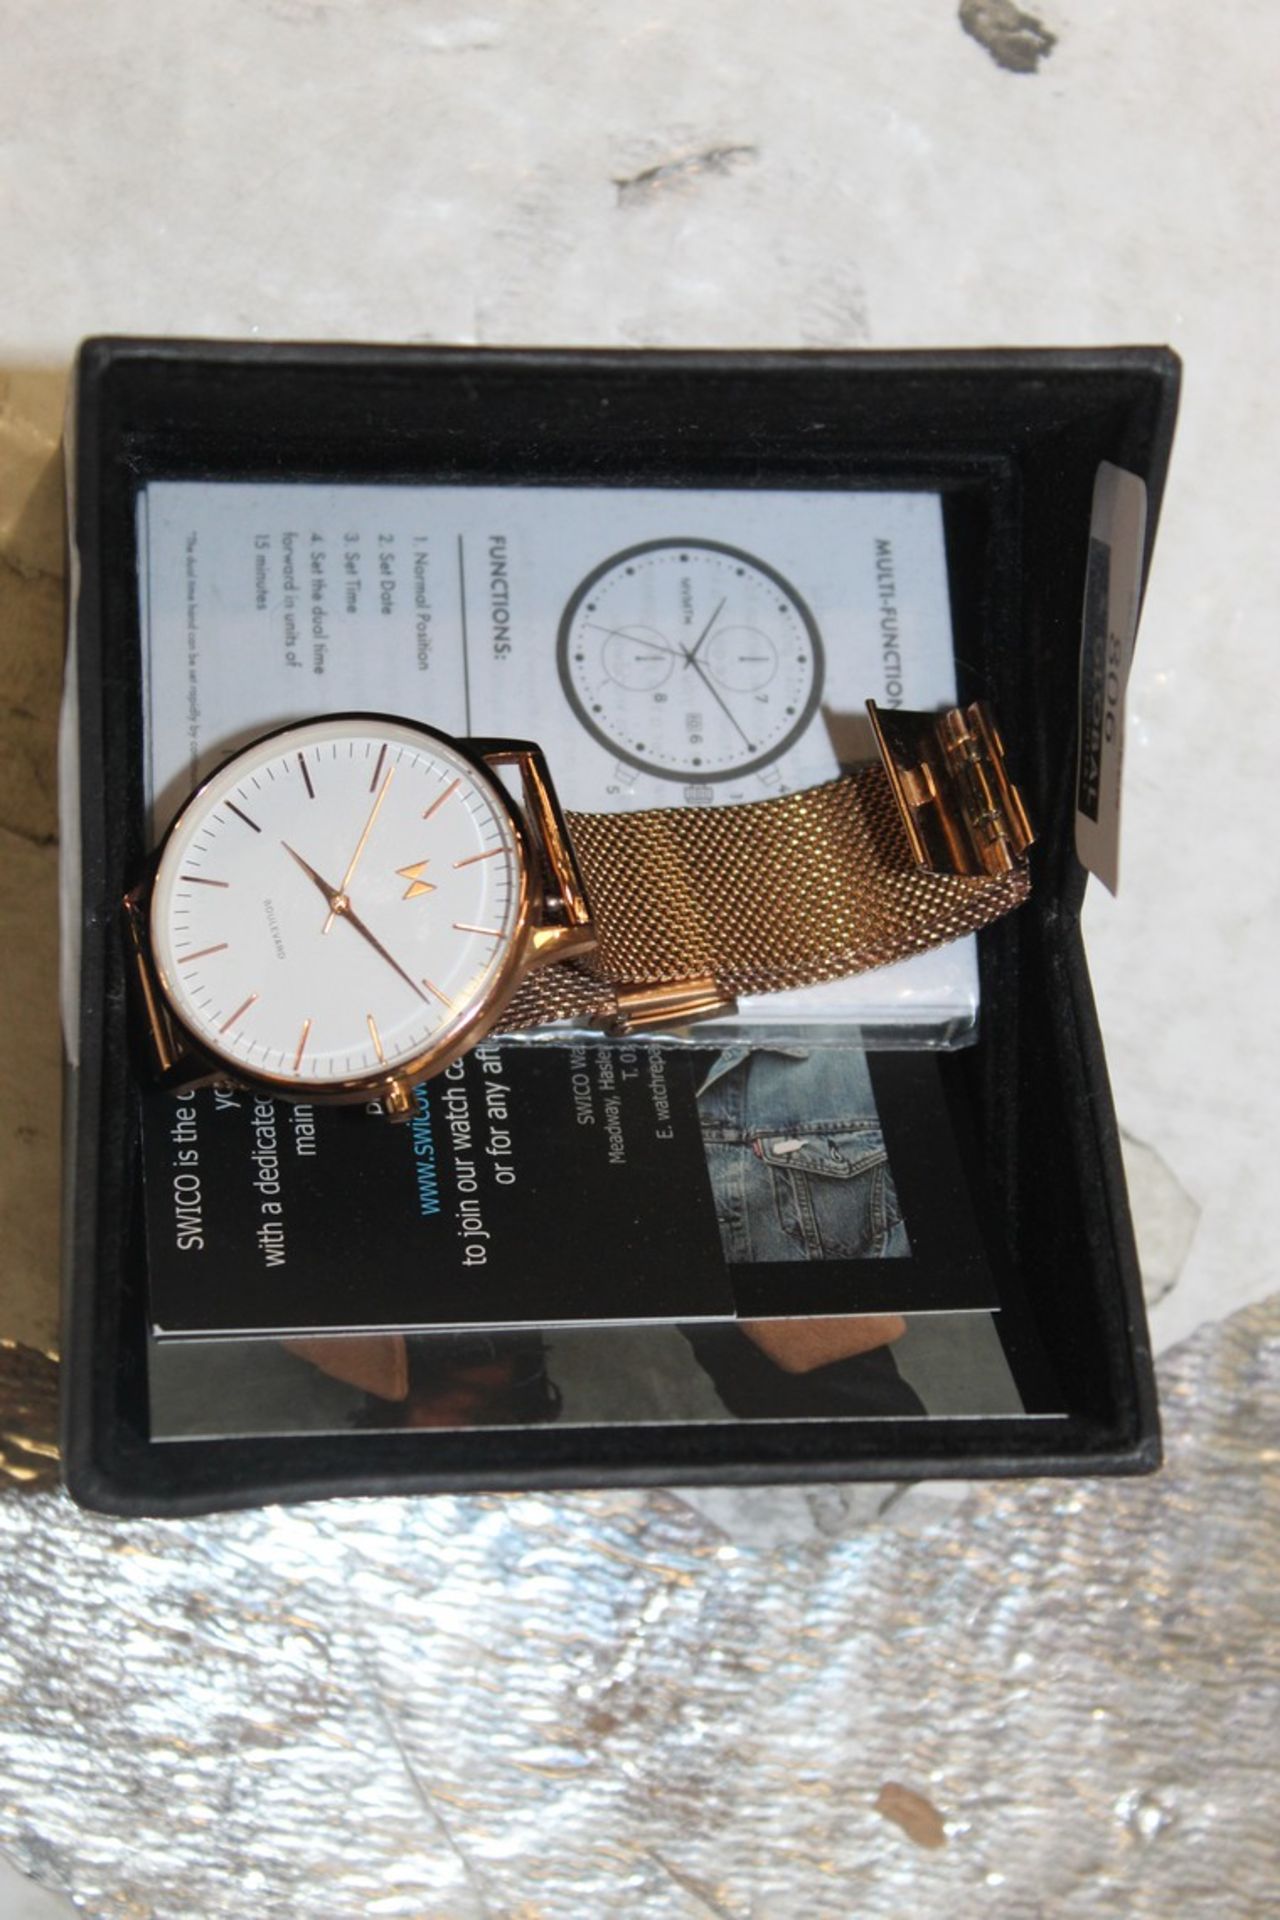 Boxed Boulevard Bracelet Strap Wrist Watch RRP £115 (1152357) (Pictures Are For Illustration